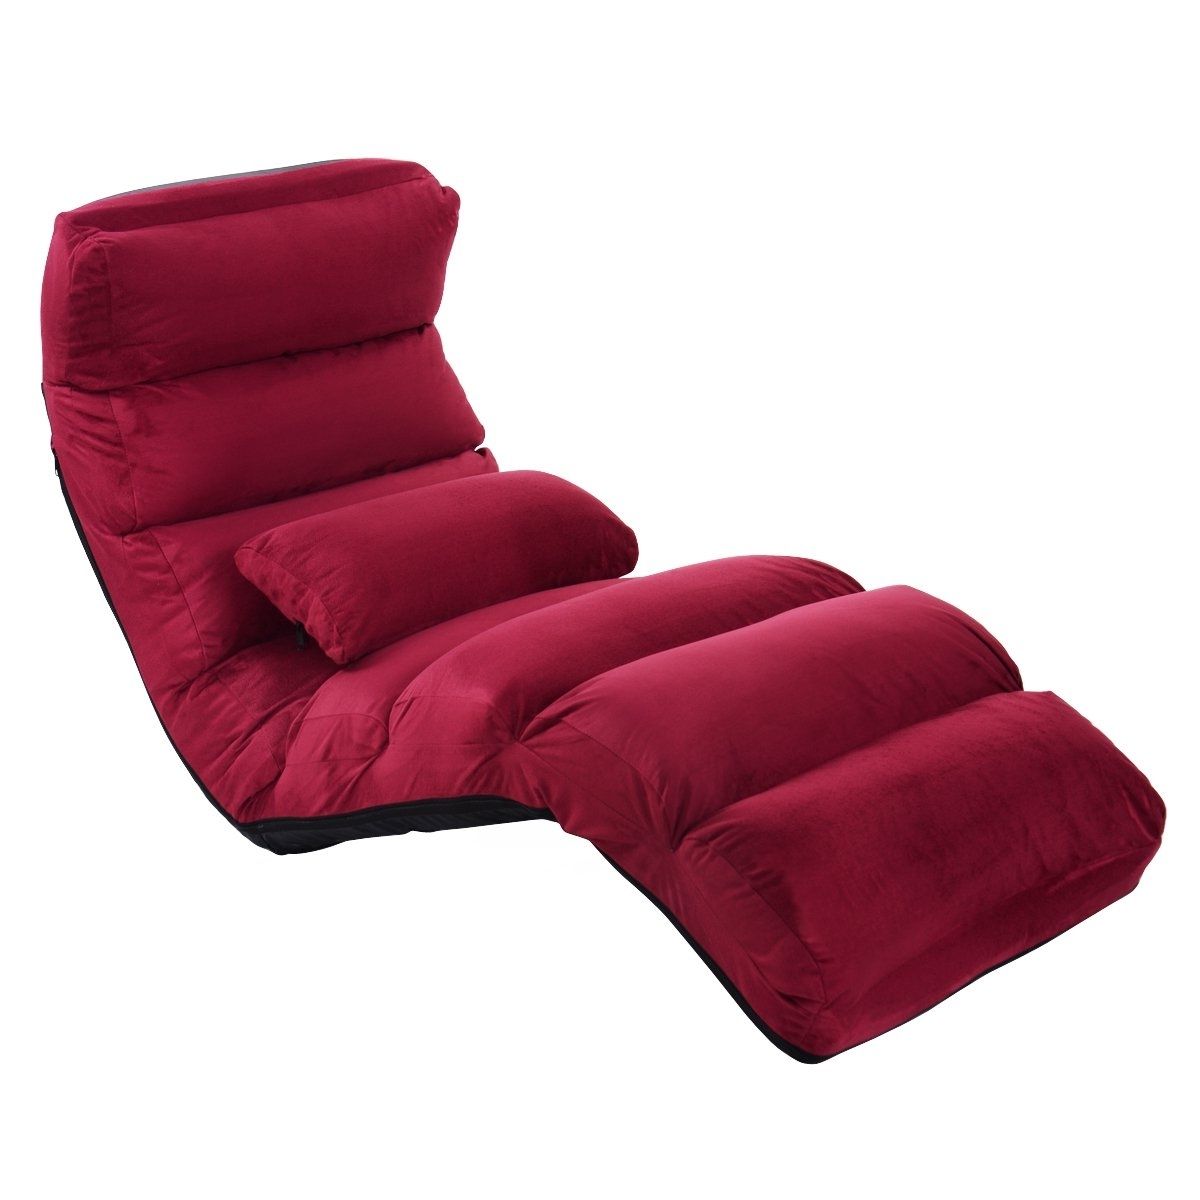 Most Recent Lazy Sofa Chairs Within Cheap Lazy Chair Ikea, Find Lazy Chair Ikea Deals On Line At (View 3 of 20)